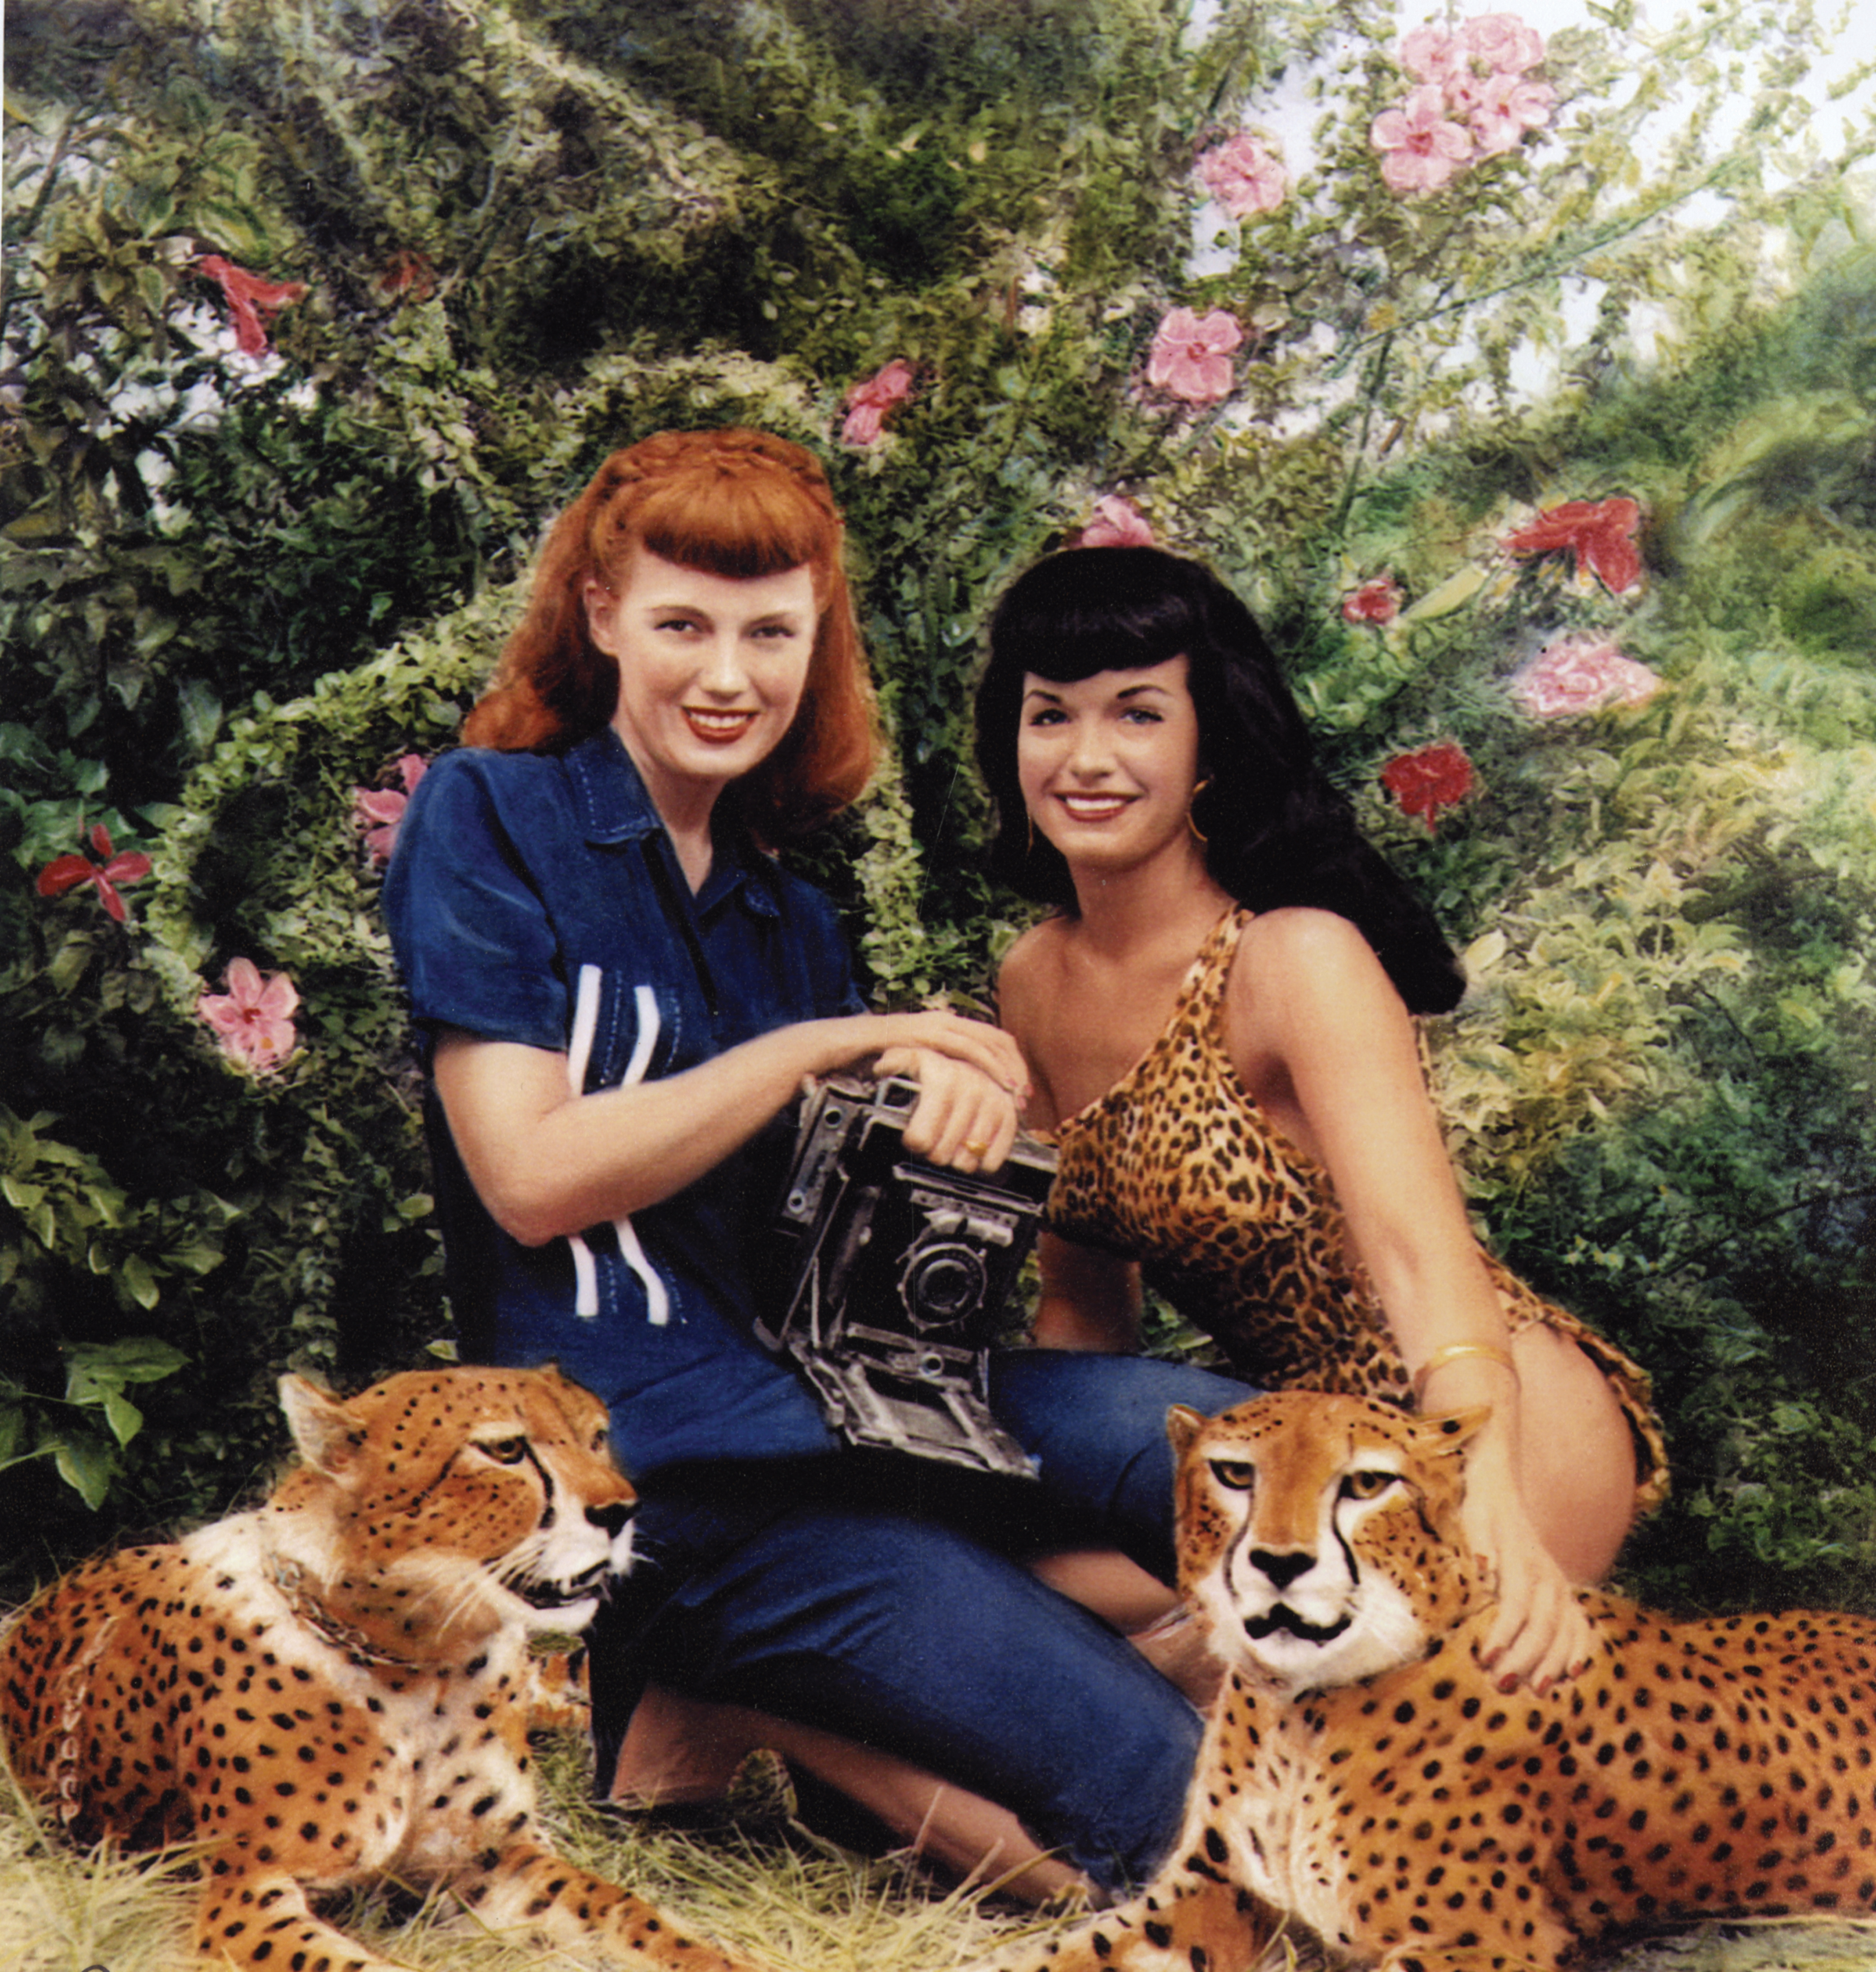 Bettie Page Reveals All,' About the Queen of Curves - The New York